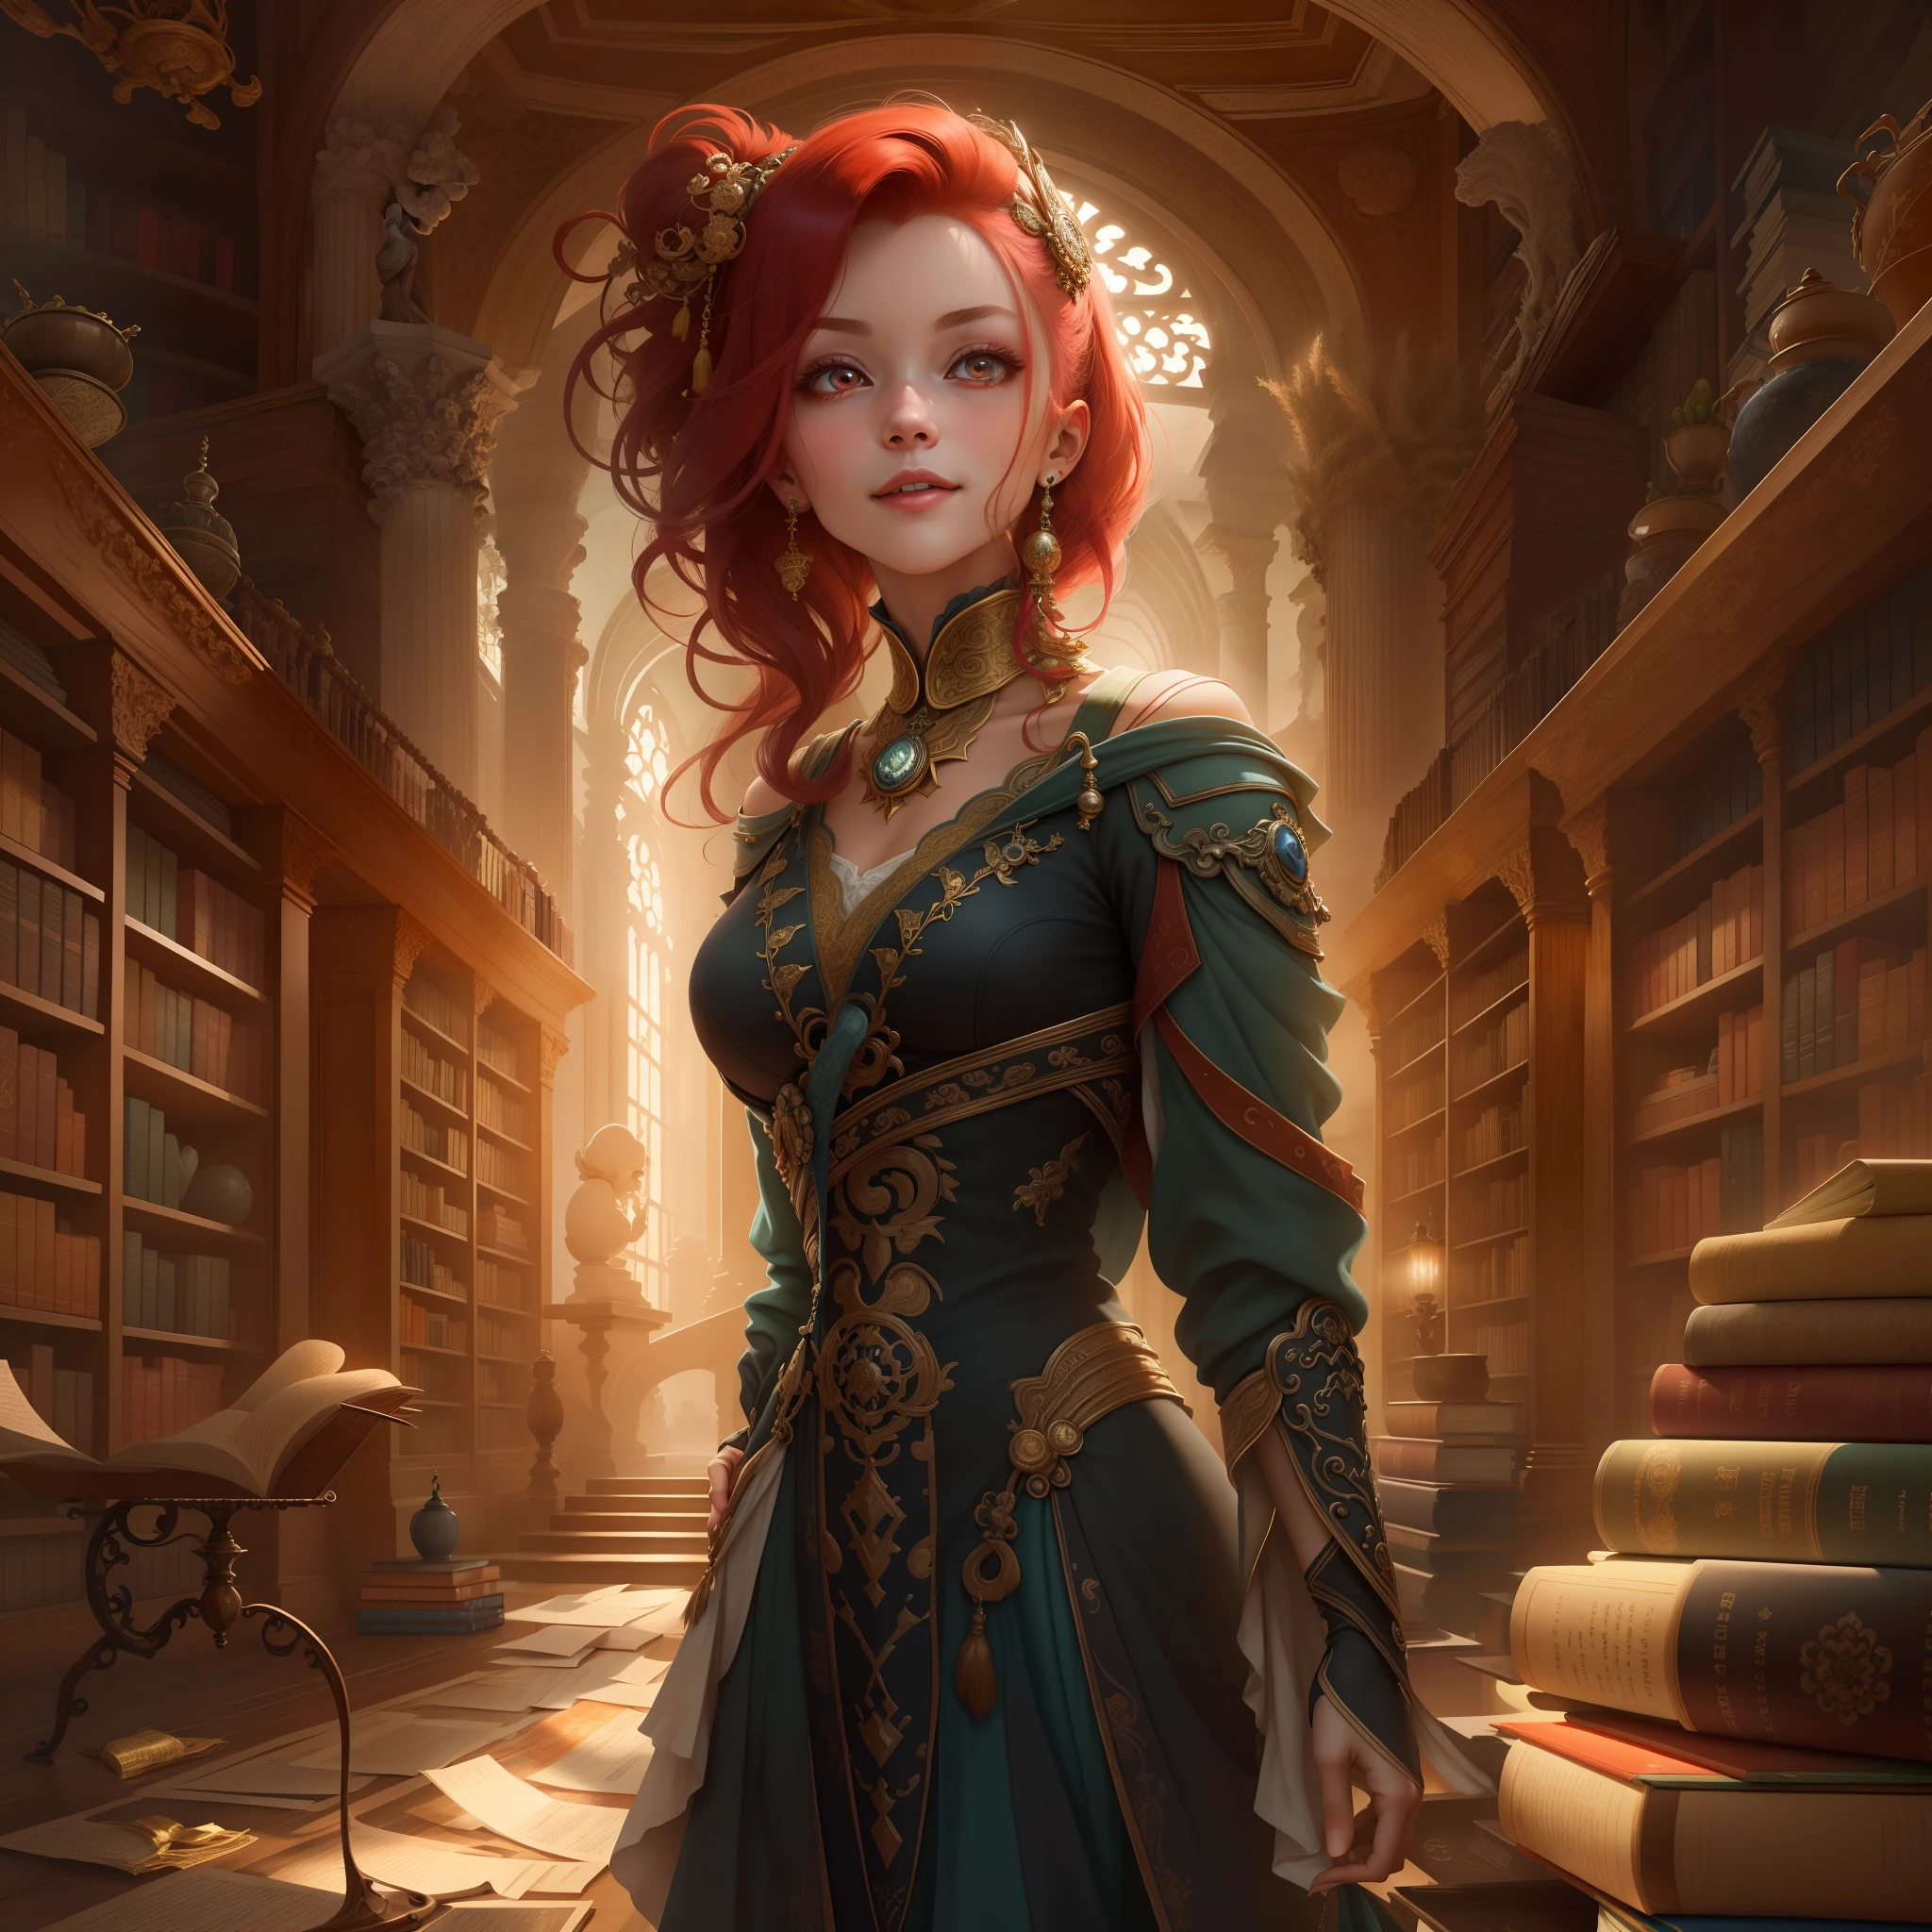 in a futuristic world, Advanced technology permeates the surrounding environment. The atmosphere is full of mystery and wonder. The scene is set in the library, The shelves are filled with ancient books and scrolls, Create a sense of knowledge and history. A  girl stands in the middle of the library, Flip through the tirades gracefully, Intricate scrolls. Her appearance is eye-catching, Bob's tailor-made hairstyle accentuates her delicate facial features. Her skin was pale, Almost ethereal, with a vibrant, Colorful hair ran down her back. Her eyes are fascinating, Shining brightly，Add an otherworldly feel. Although her lips were closed, She had a charming smile on her face, Hint at the secrets of her heart. Her red eyes, Piercing and sturdy, Convey strength and vulnerability. She leaned against the bookshelf for support, Show off her elegant posture.